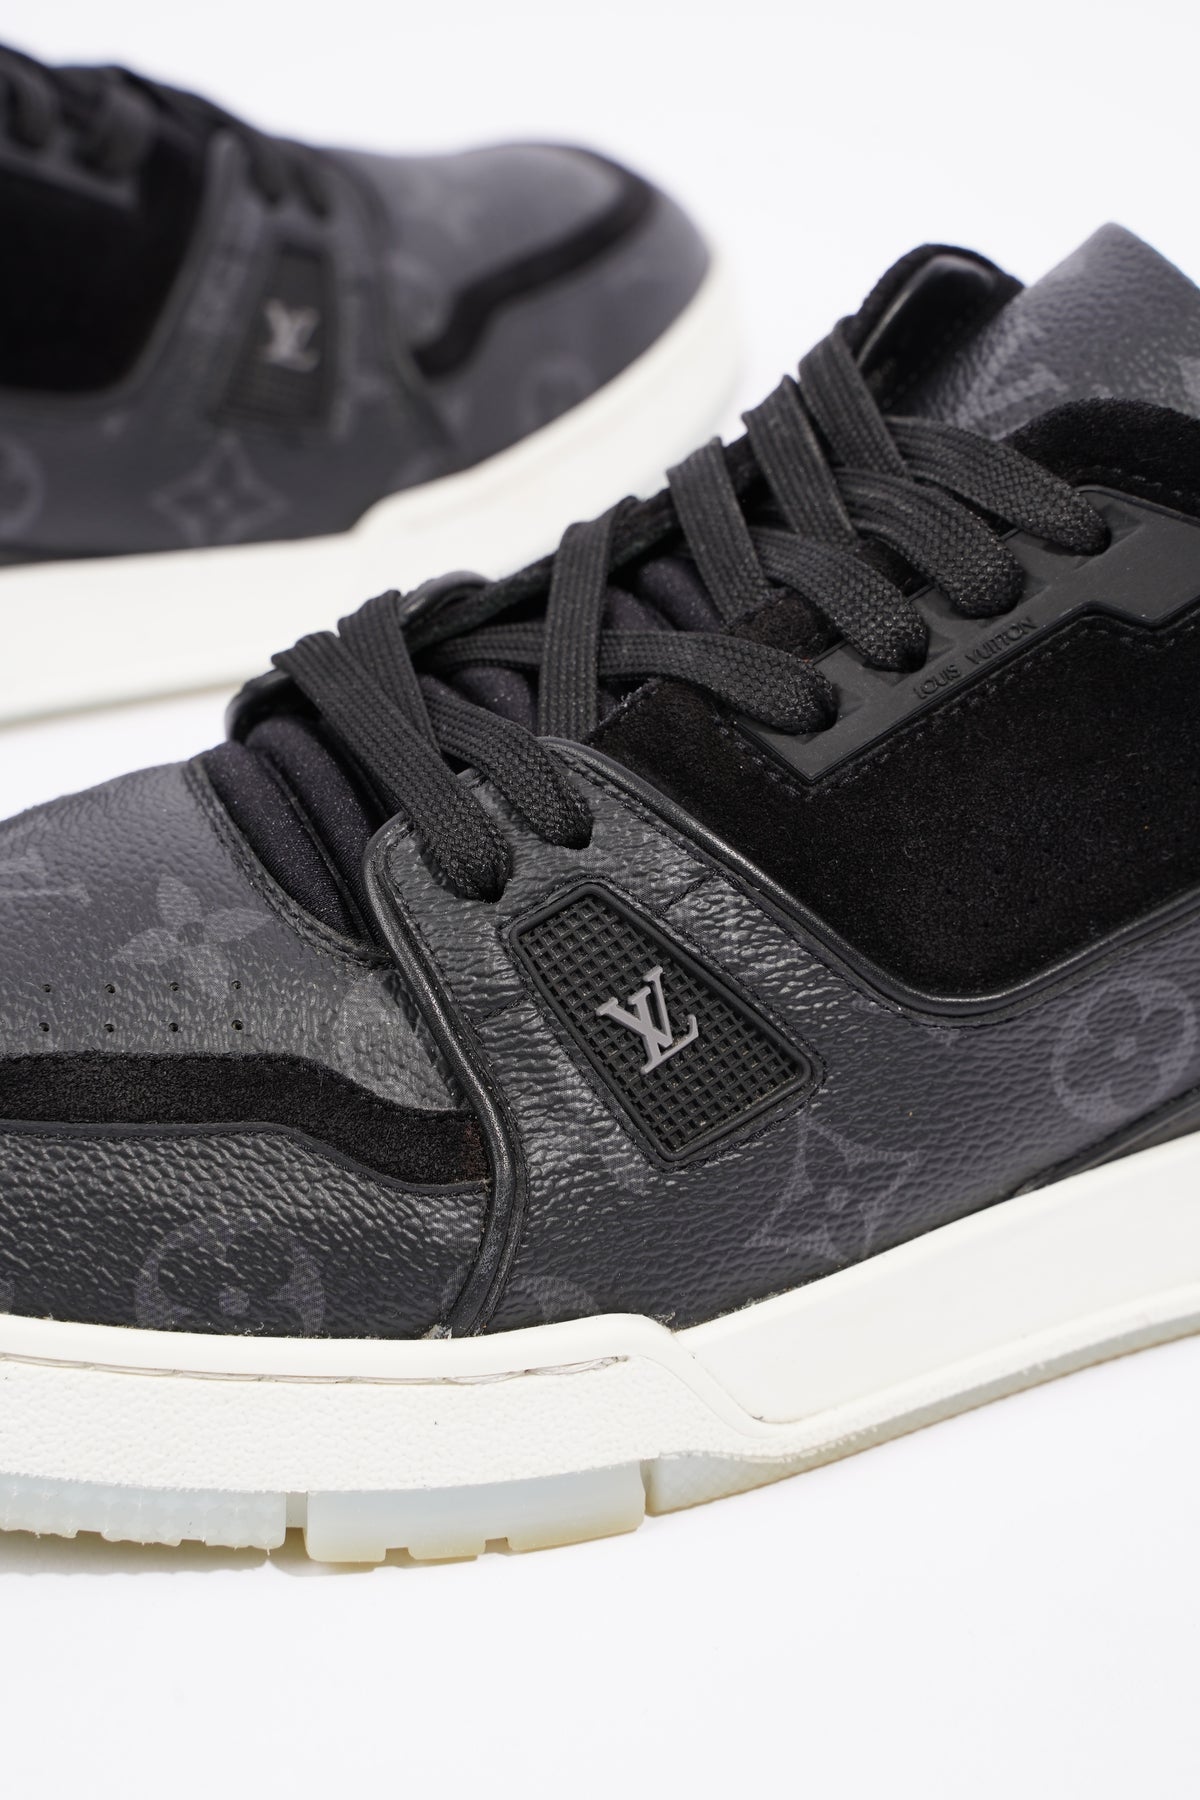 Match up leather high trainers Louis Vuitton Black size 9 UK in